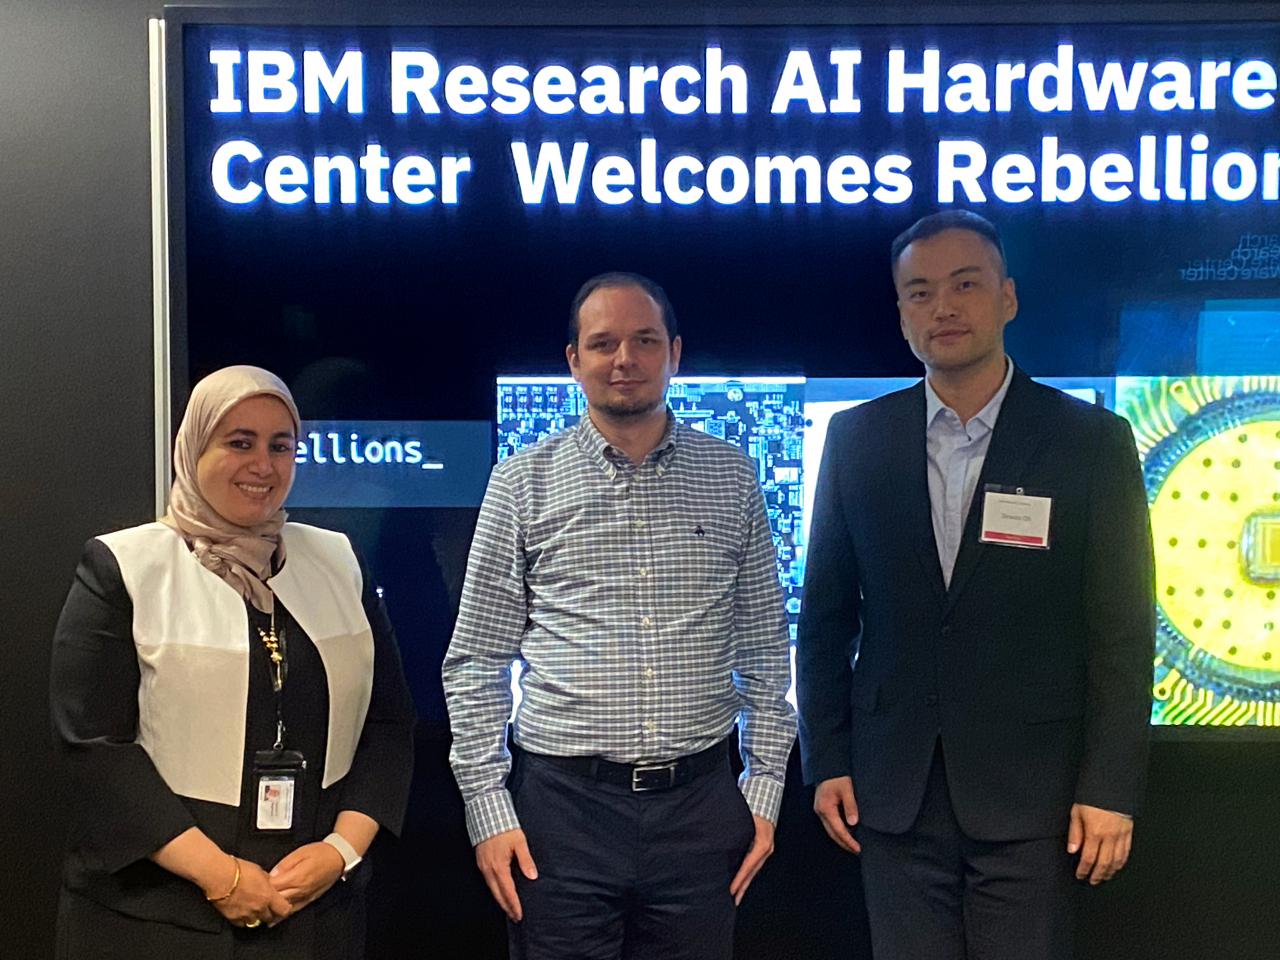 From left: Kaoutar El Maghraoui, a principal research scientist at IBM Research AI, John Rozen, a program director at AI Hardware Center, and Oh Jin-wook, chief technology officer and co-founder of Rebellions, pose for a photo at IBM Research's AI Hardware Center in Albany, New York. (Rebellions)